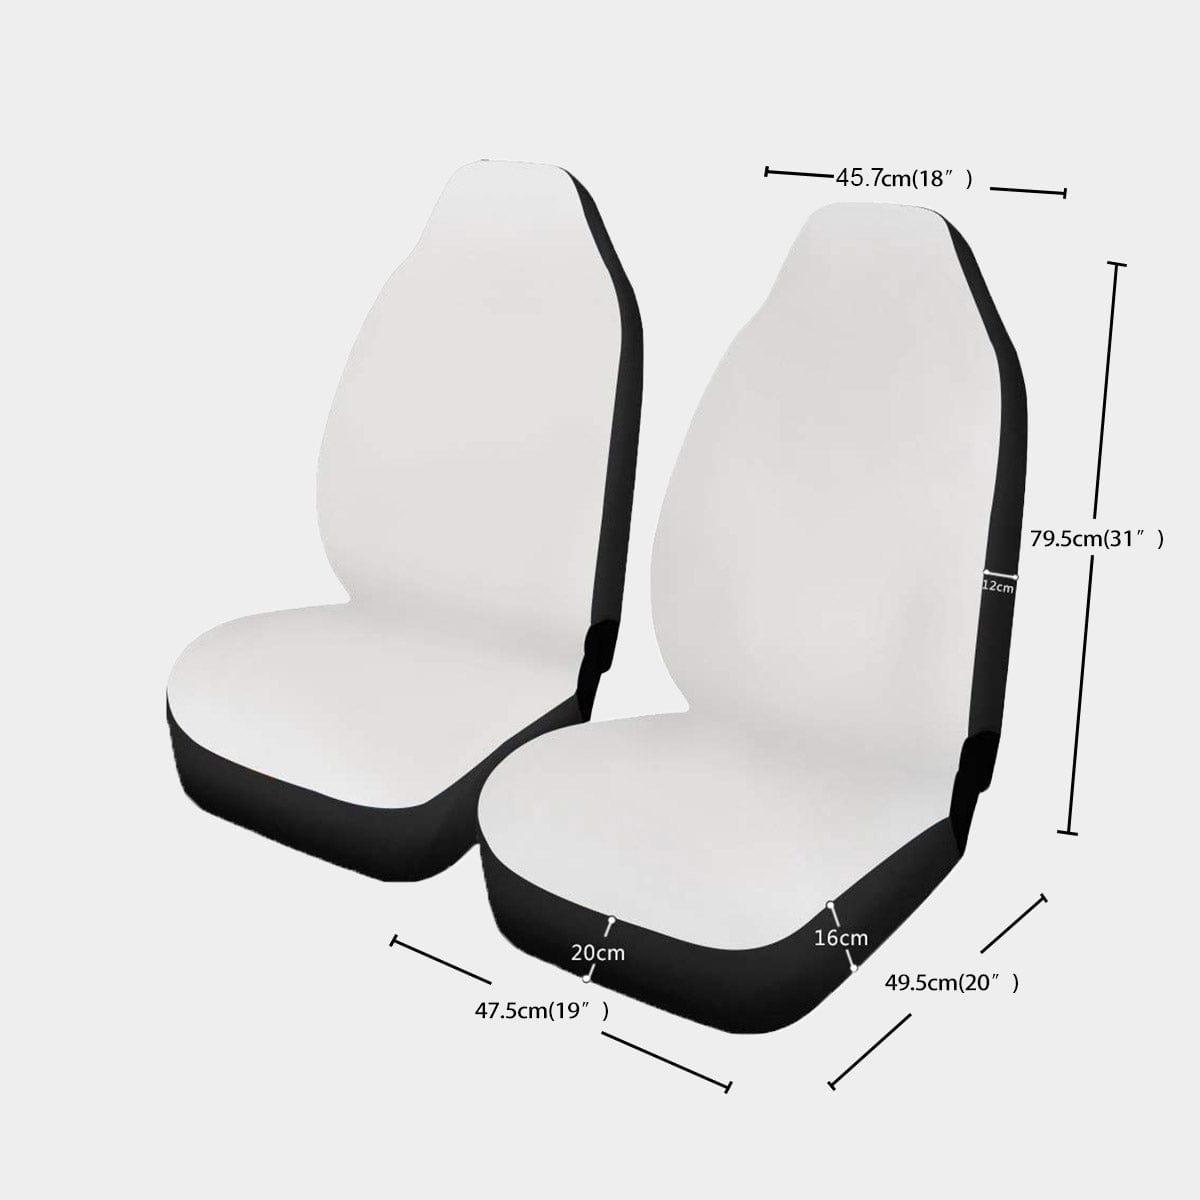 Yoycol U / White Super Dad - Gifts for Dad - Universal Car Seat Cover With Thickened Back